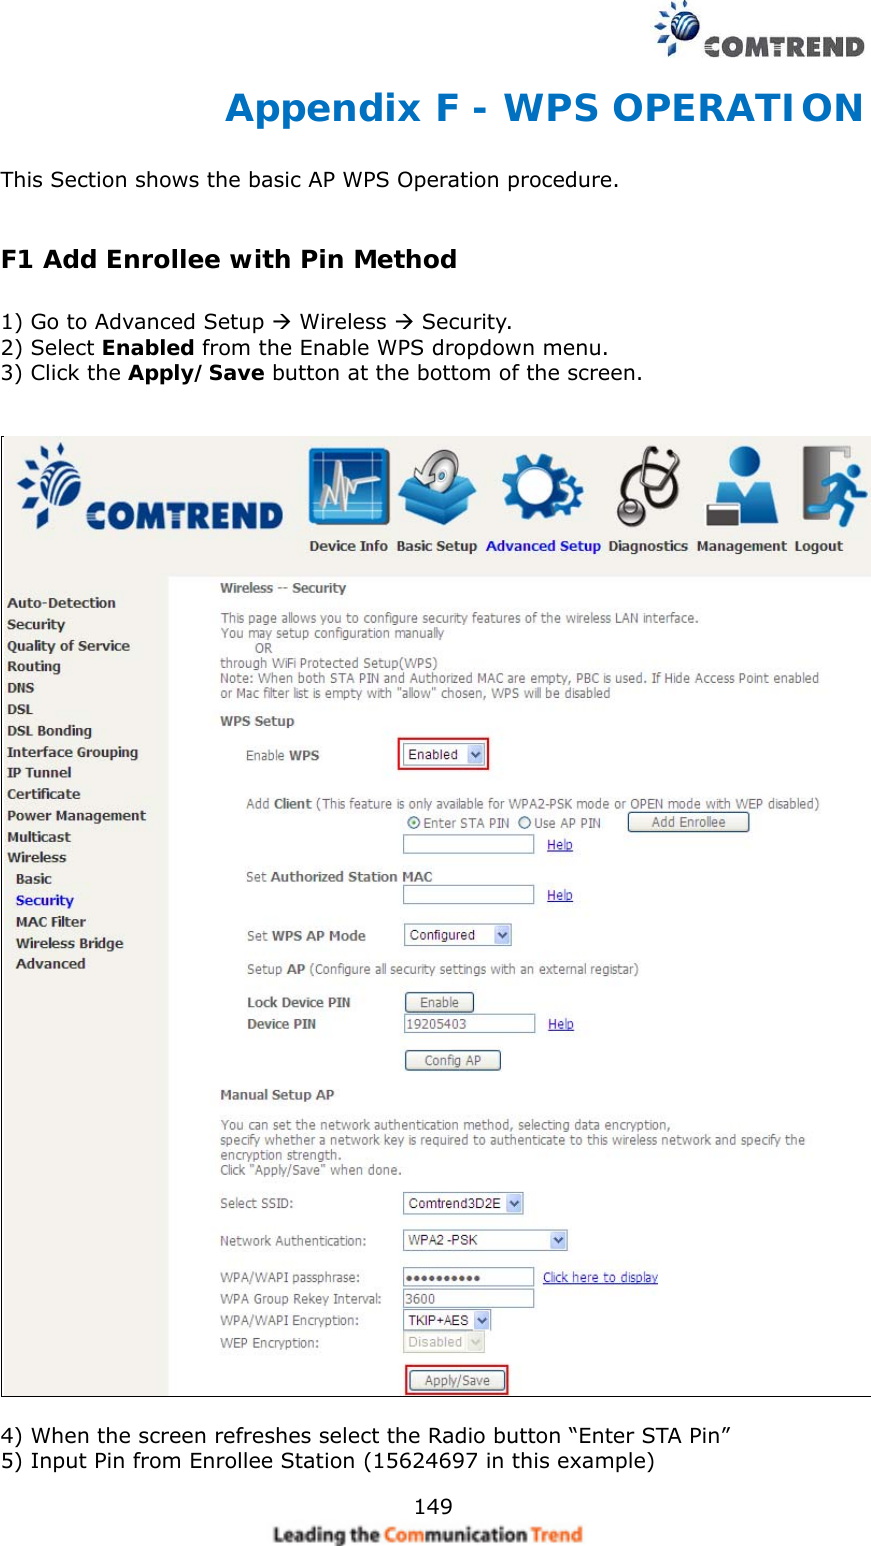    149Appendix F - WPS OPERATION This Section shows the basic AP WPS Operation procedure.   F1 Add Enrollee with Pin Method  1) Go to Advanced Setup  Wireless  Security. 2) Select Enabled from the Enable WPS dropdown menu. 3) Click the Apply/Save button at the bottom of the screen.     4) When the screen refreshes select the Radio button “Enter STA Pin” 5) Input Pin from Enrollee Station (15624697 in this example)     